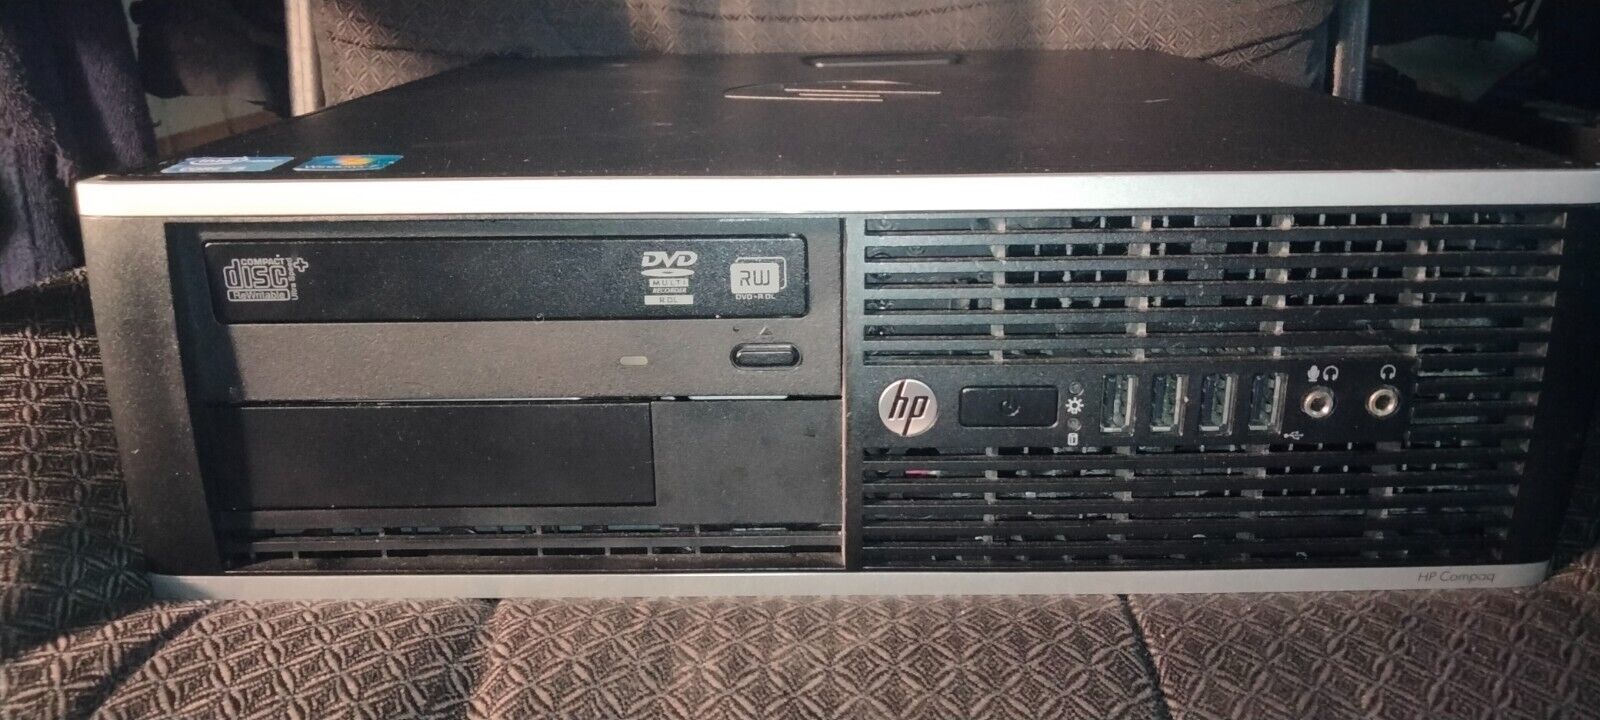 As Is- HP Compaq 6200 Pro SFF Core i5-2400@3.10GHz